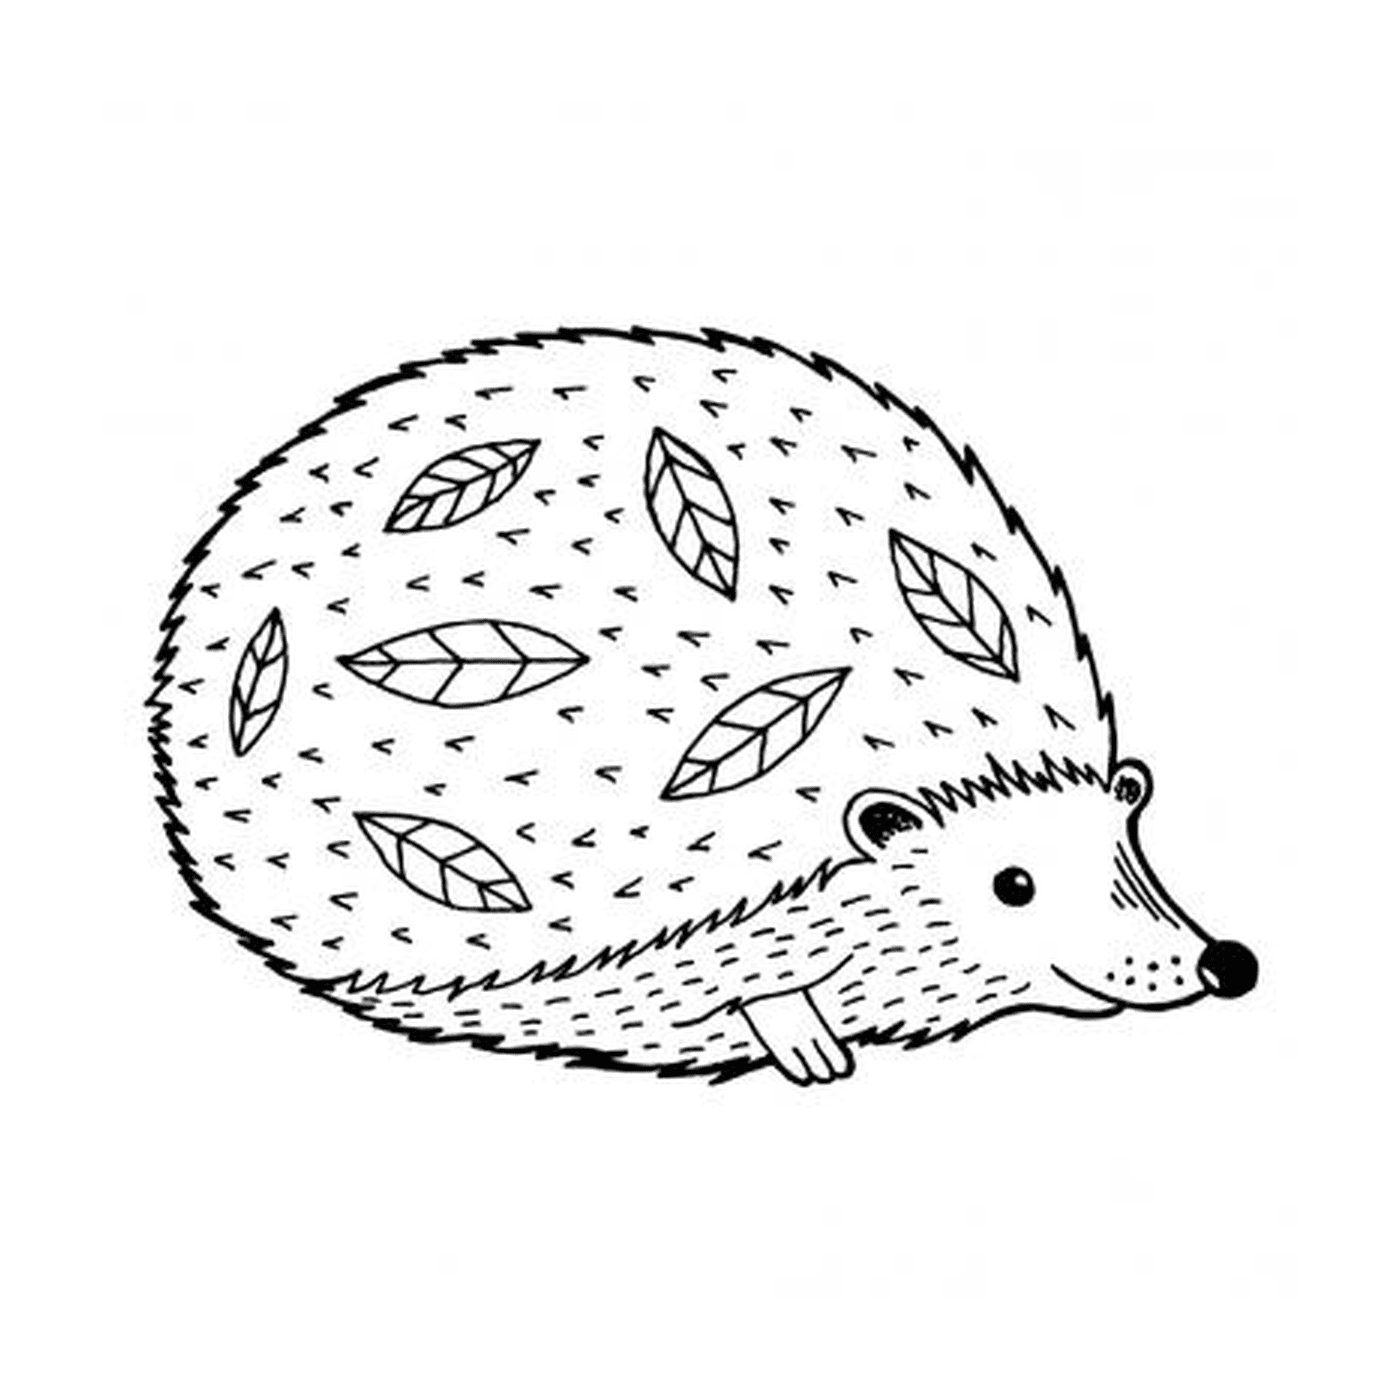  Zen hedgehog with leaves on the back 